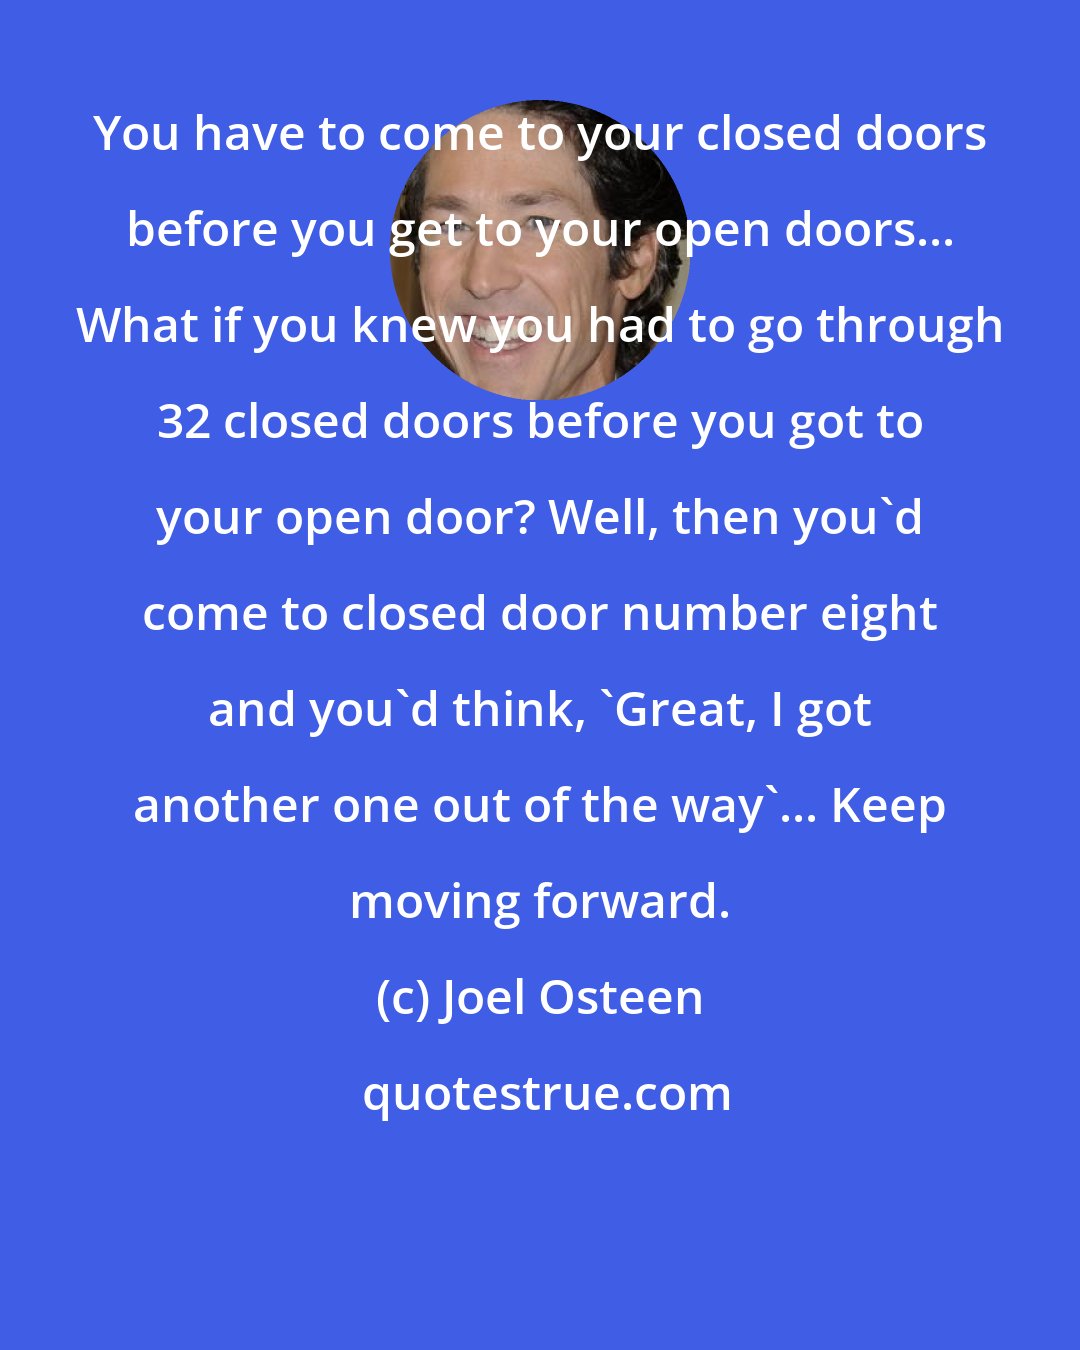 Joel Osteen: You have to come to your closed doors before you get to your open doors... What if you knew you had to go through 32 closed doors before you got to your open door? Well, then you'd come to closed door number eight and you'd think, 'Great, I got another one out of the way'... Keep moving forward.